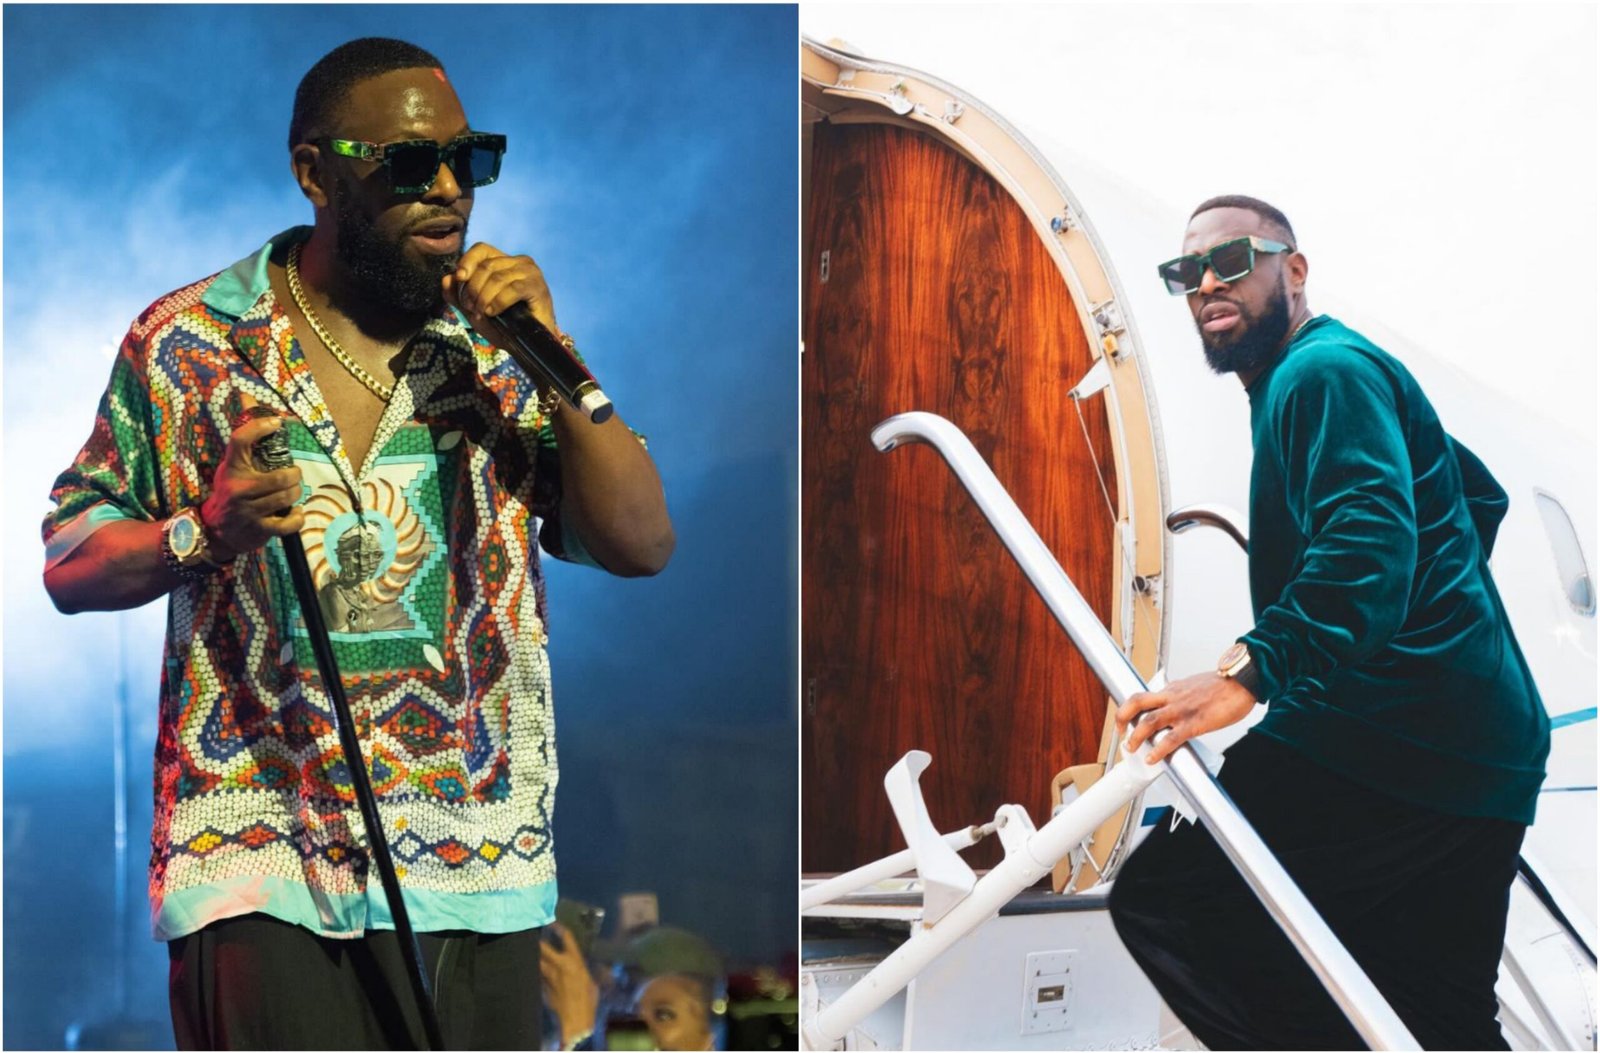 It’s Impossible for me to go broke again – Timaya shares